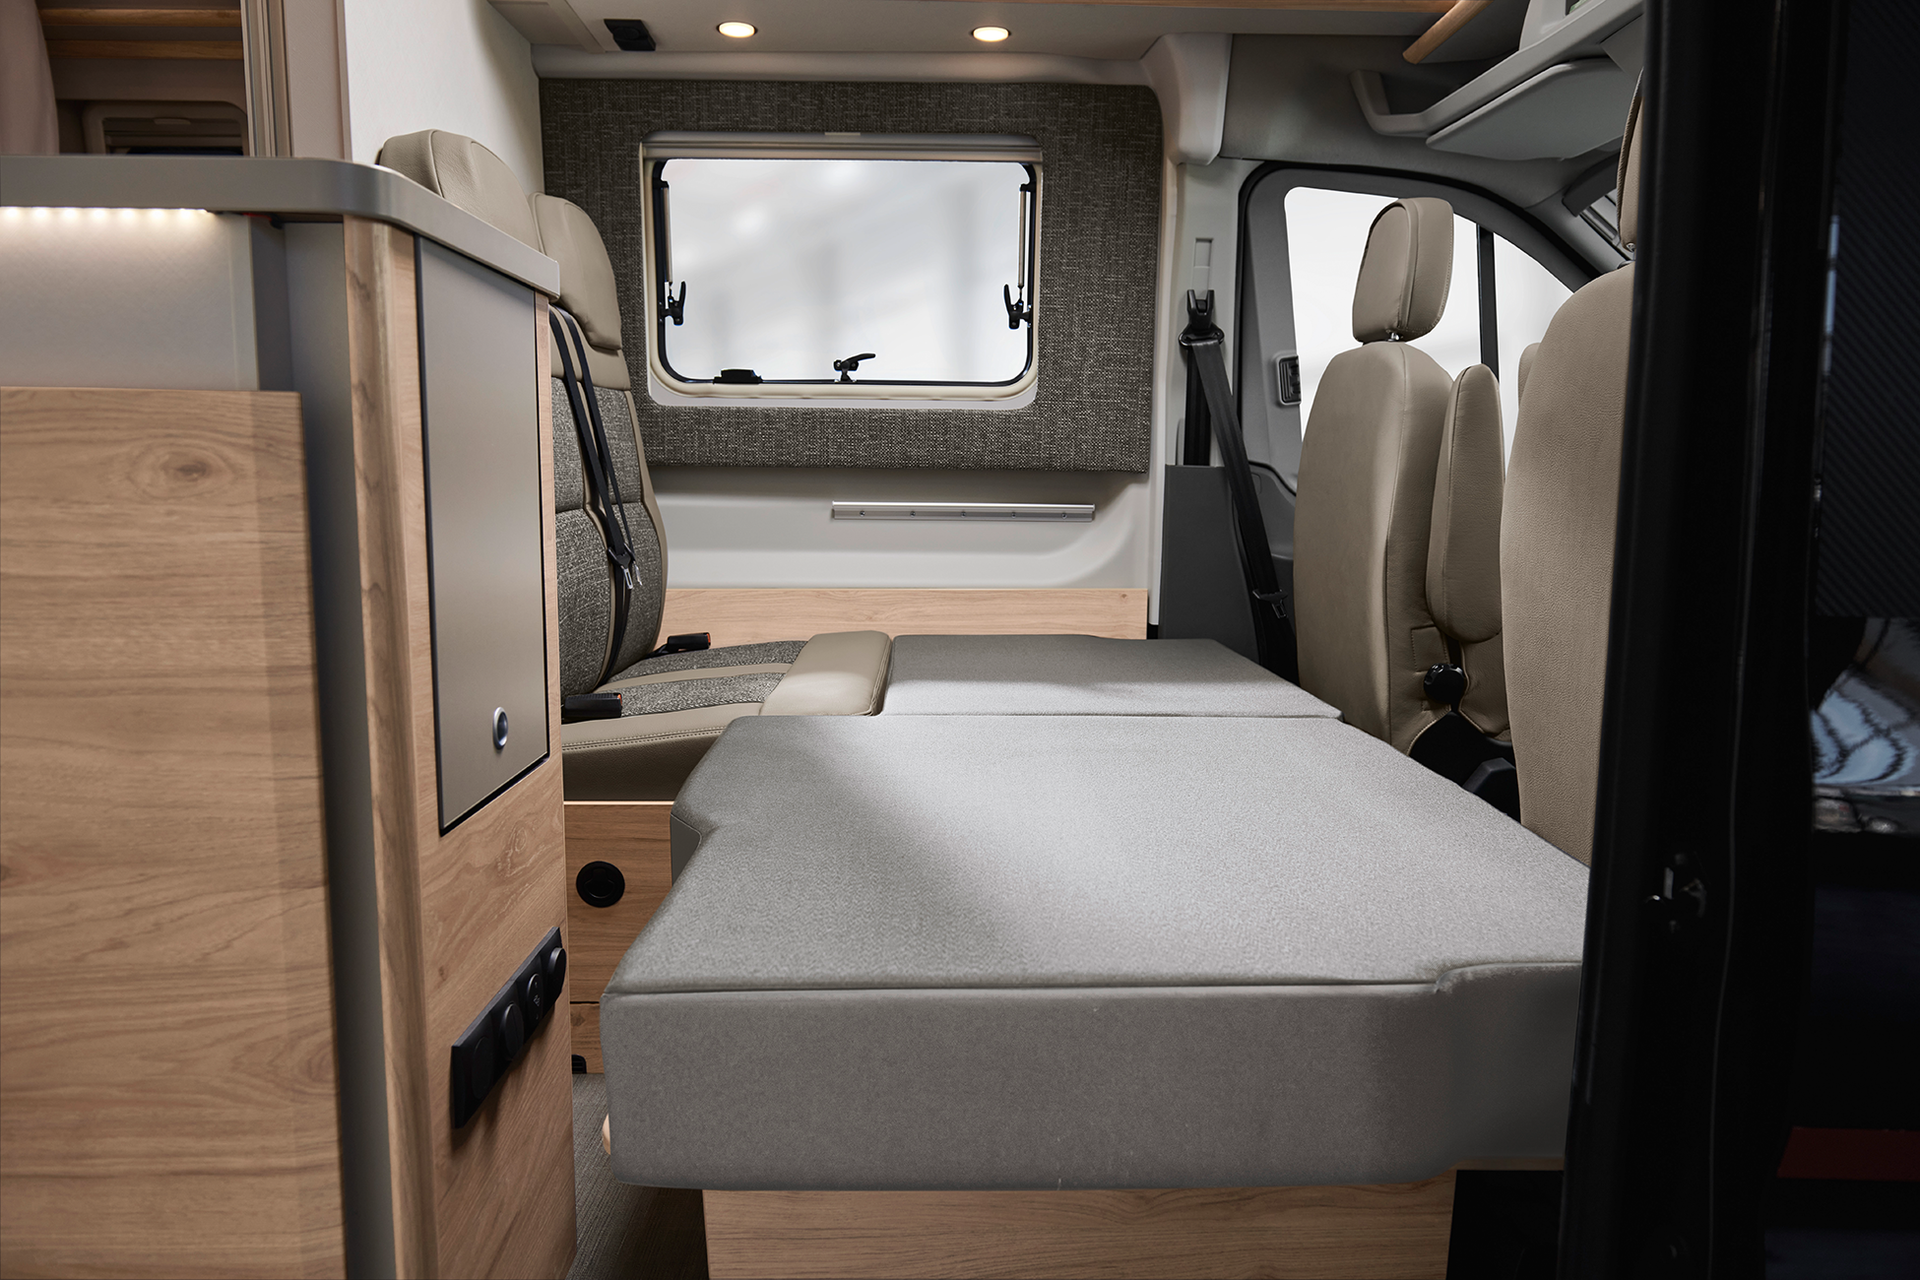 The seating lounge can be converted to create an additional berth with a sleeping area of 168x101/78 cm.